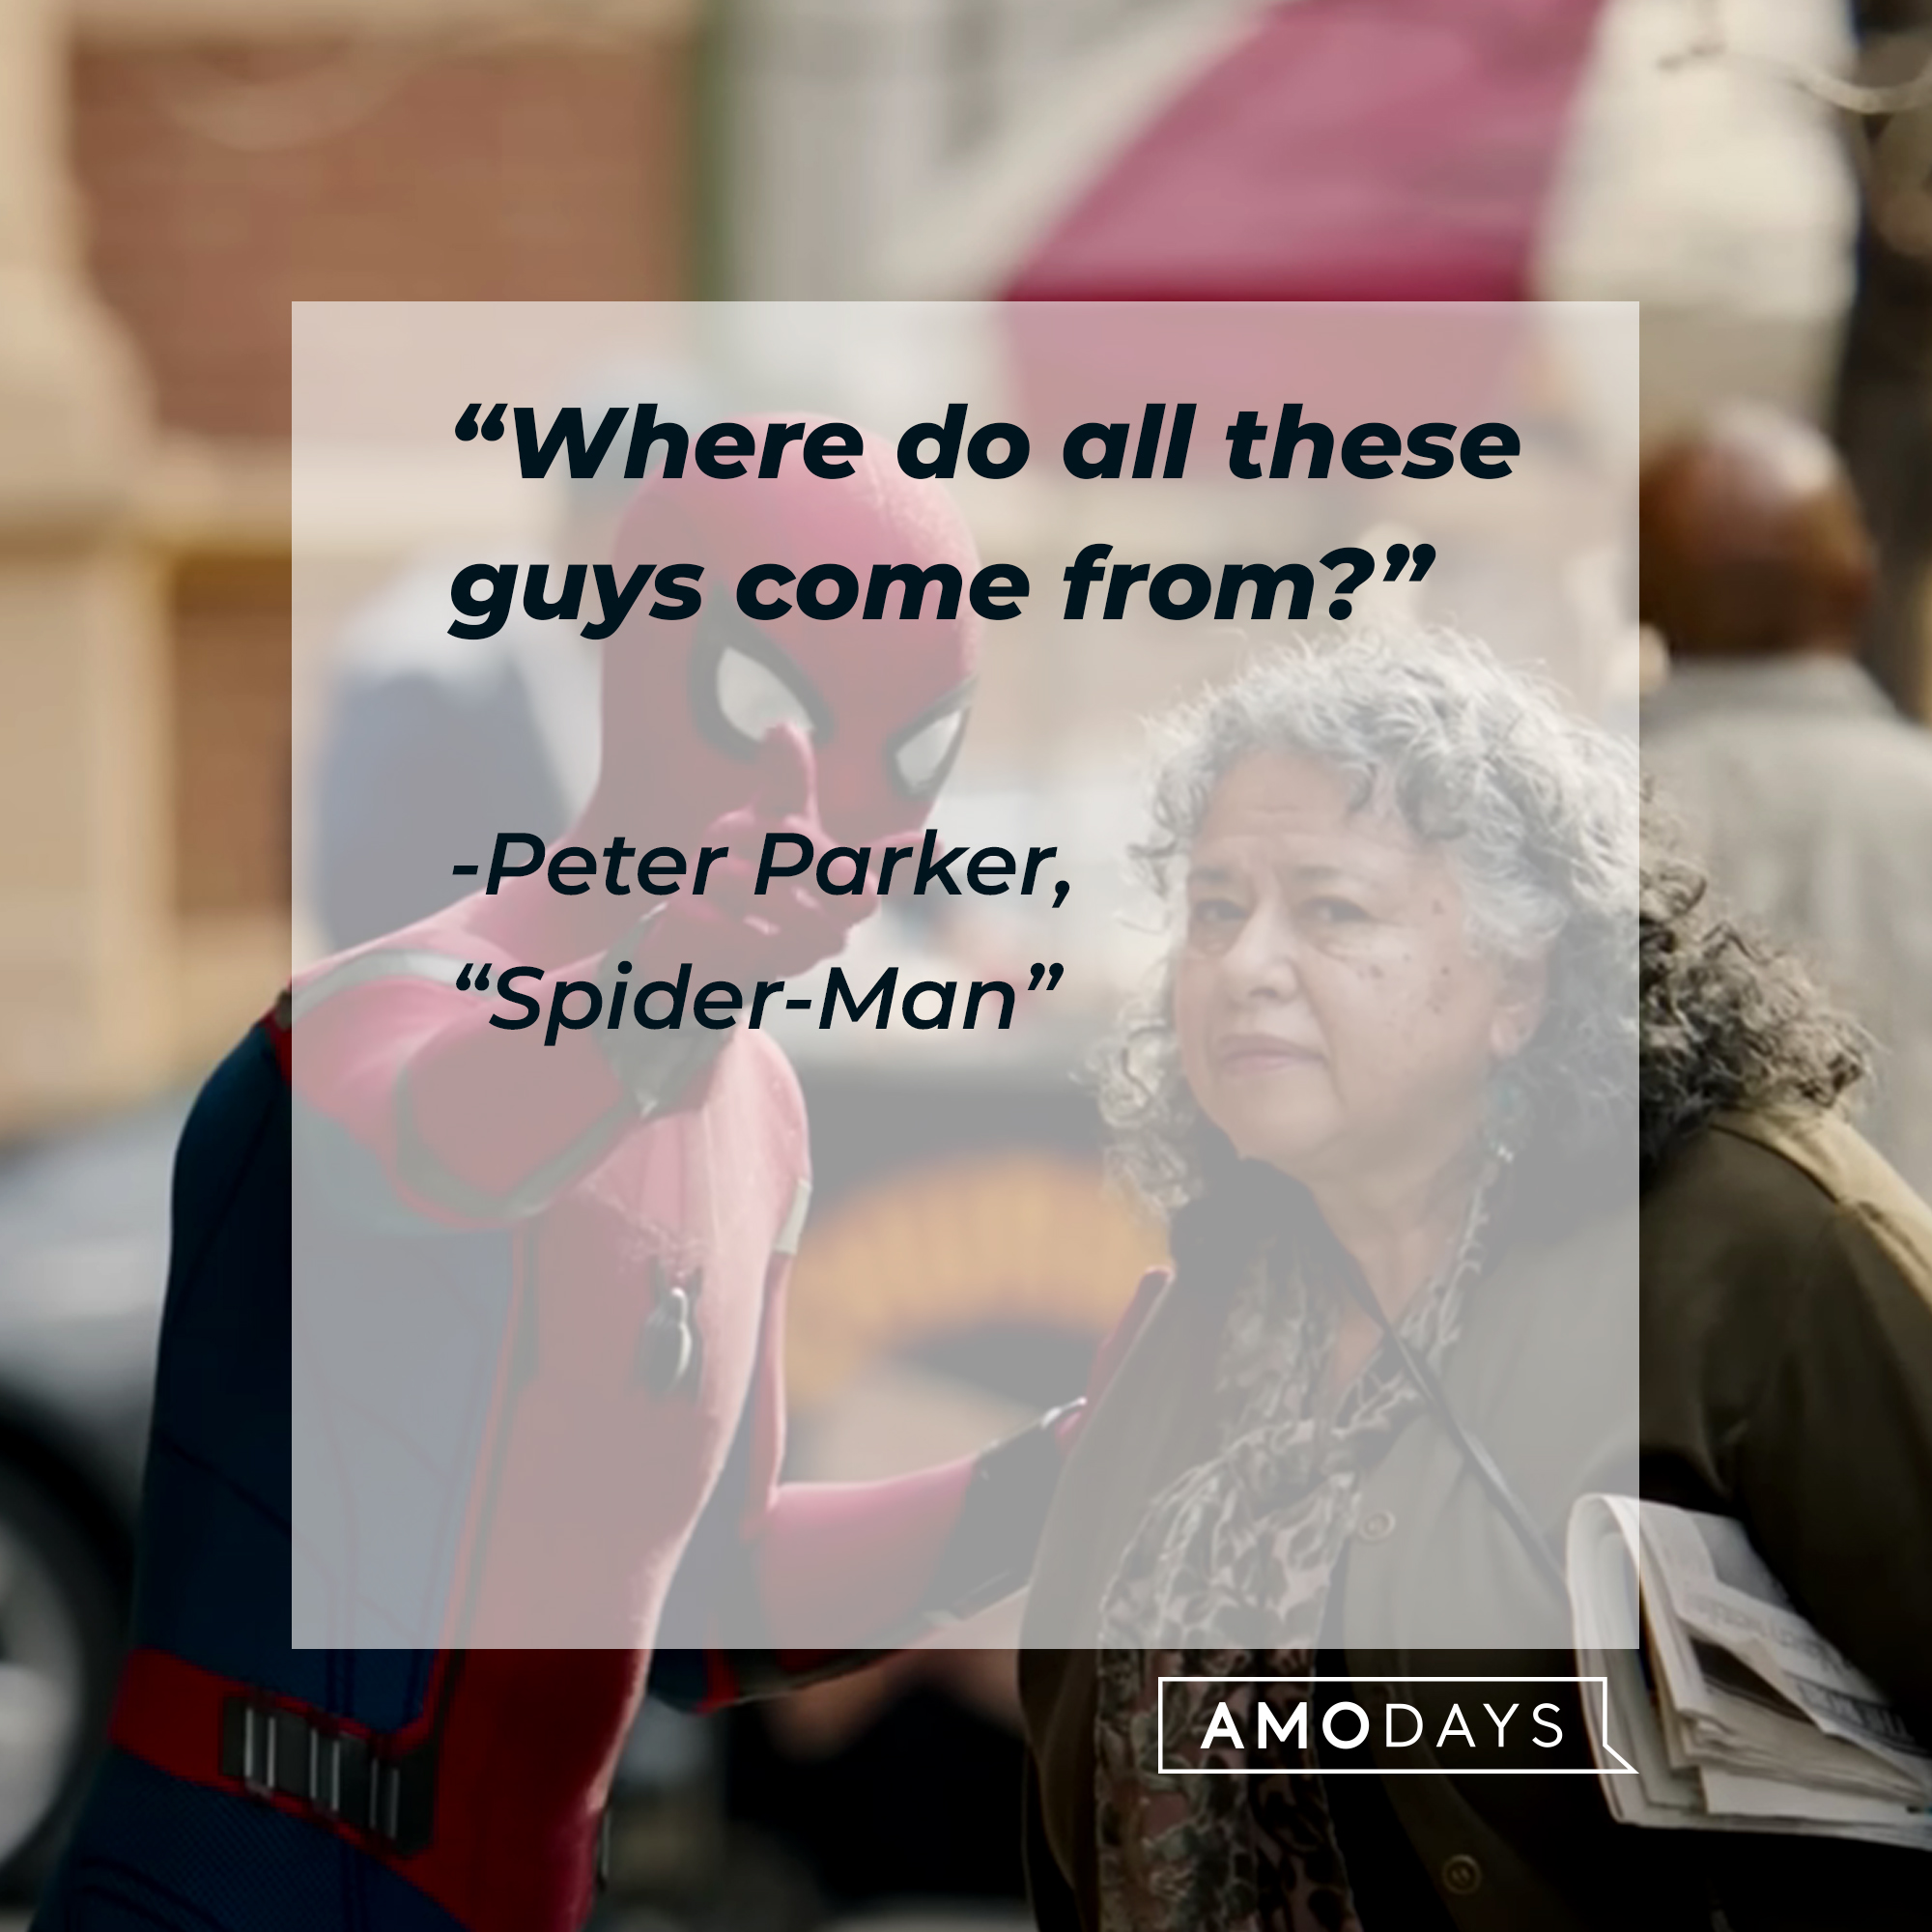 Spider-Man's quote from "Spider-Man:" “Where do all these guys come from?”  | Source: Facebook.com/SpiderManMovie